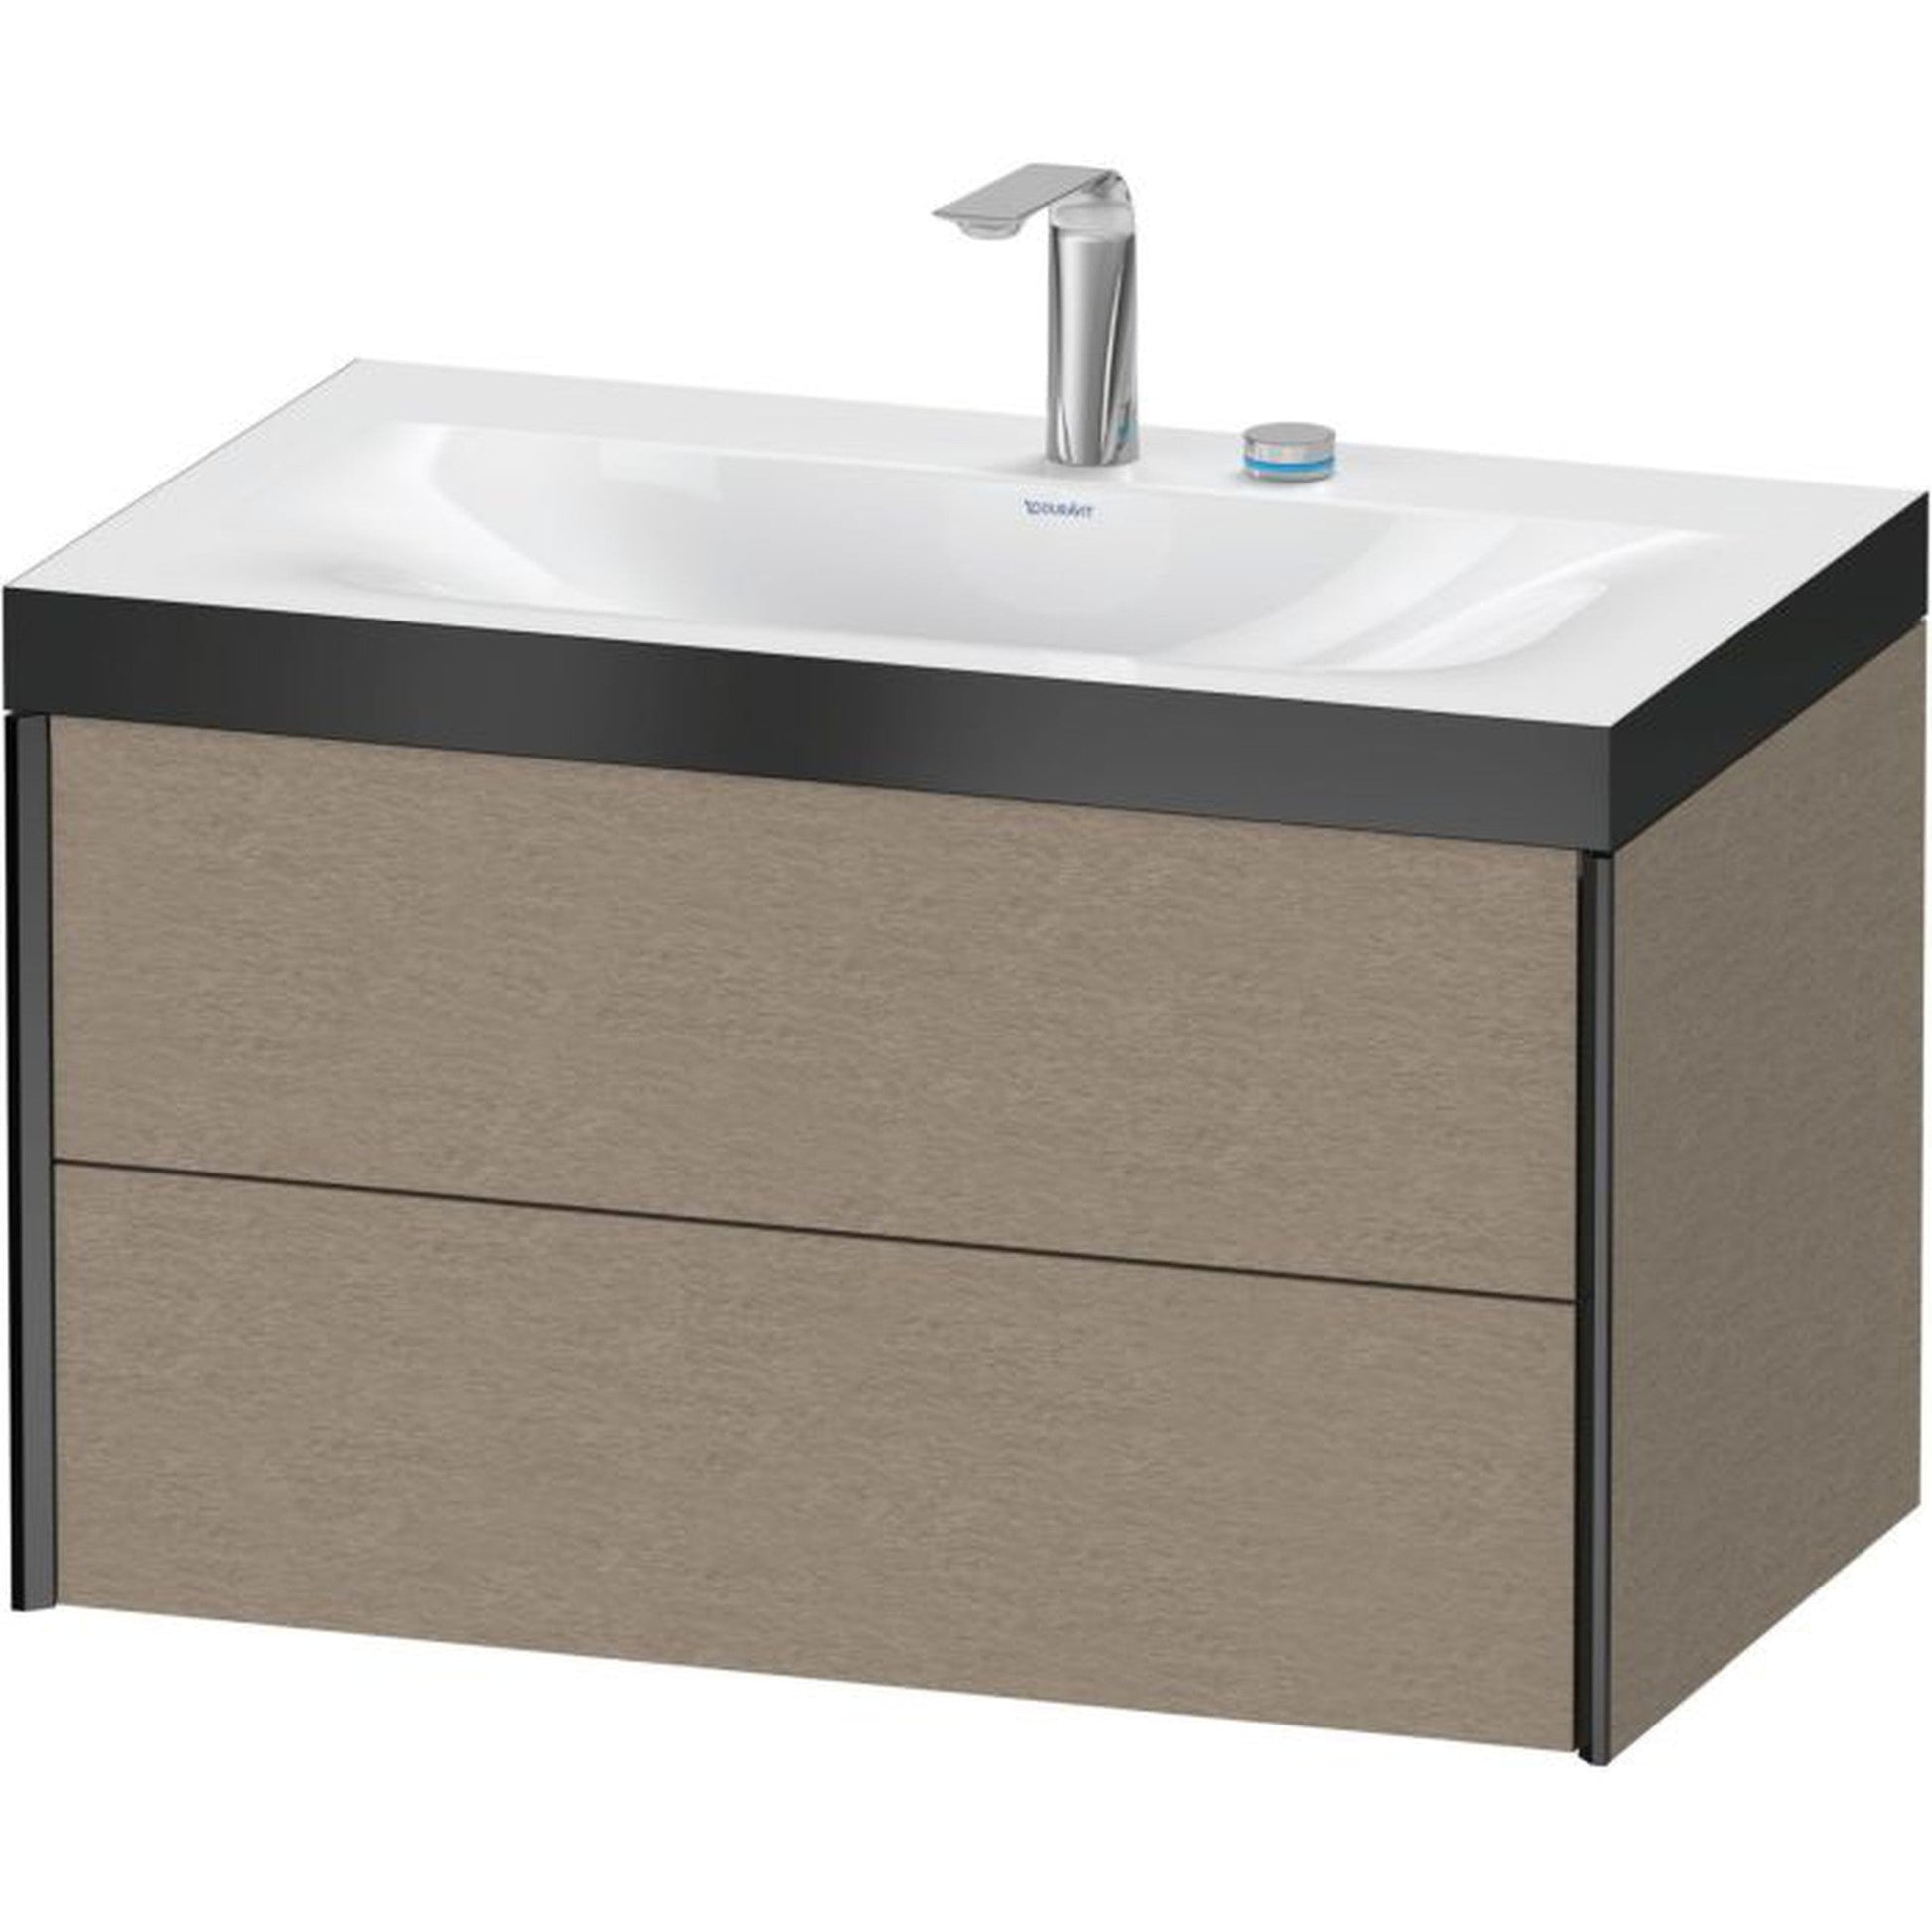 Duravit Xviu 31" x 20" x 19" Two Drawer C-Bonded Wall-Mount Vanity Kit With Two Tap Holes, Cashmere Oak (XV4615EB211P)